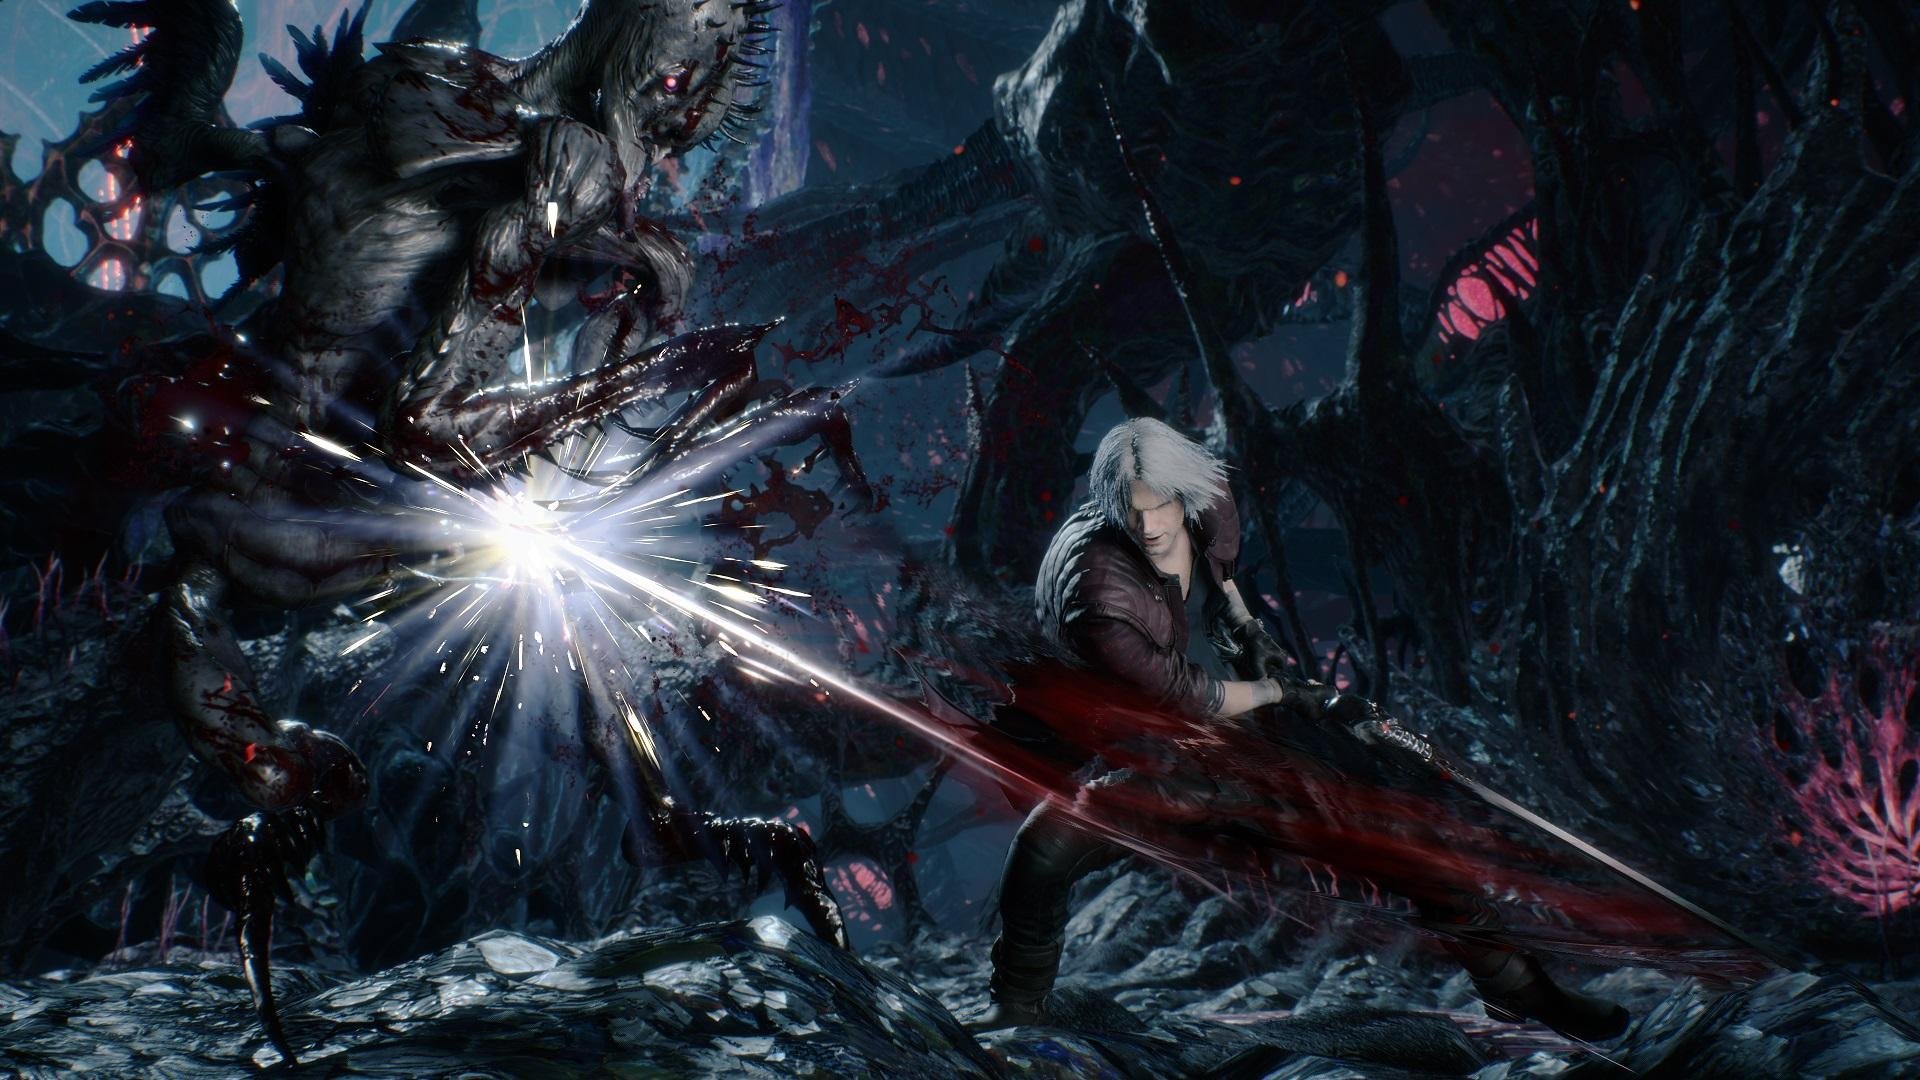 Devil May Cry 5 Review (PS4)